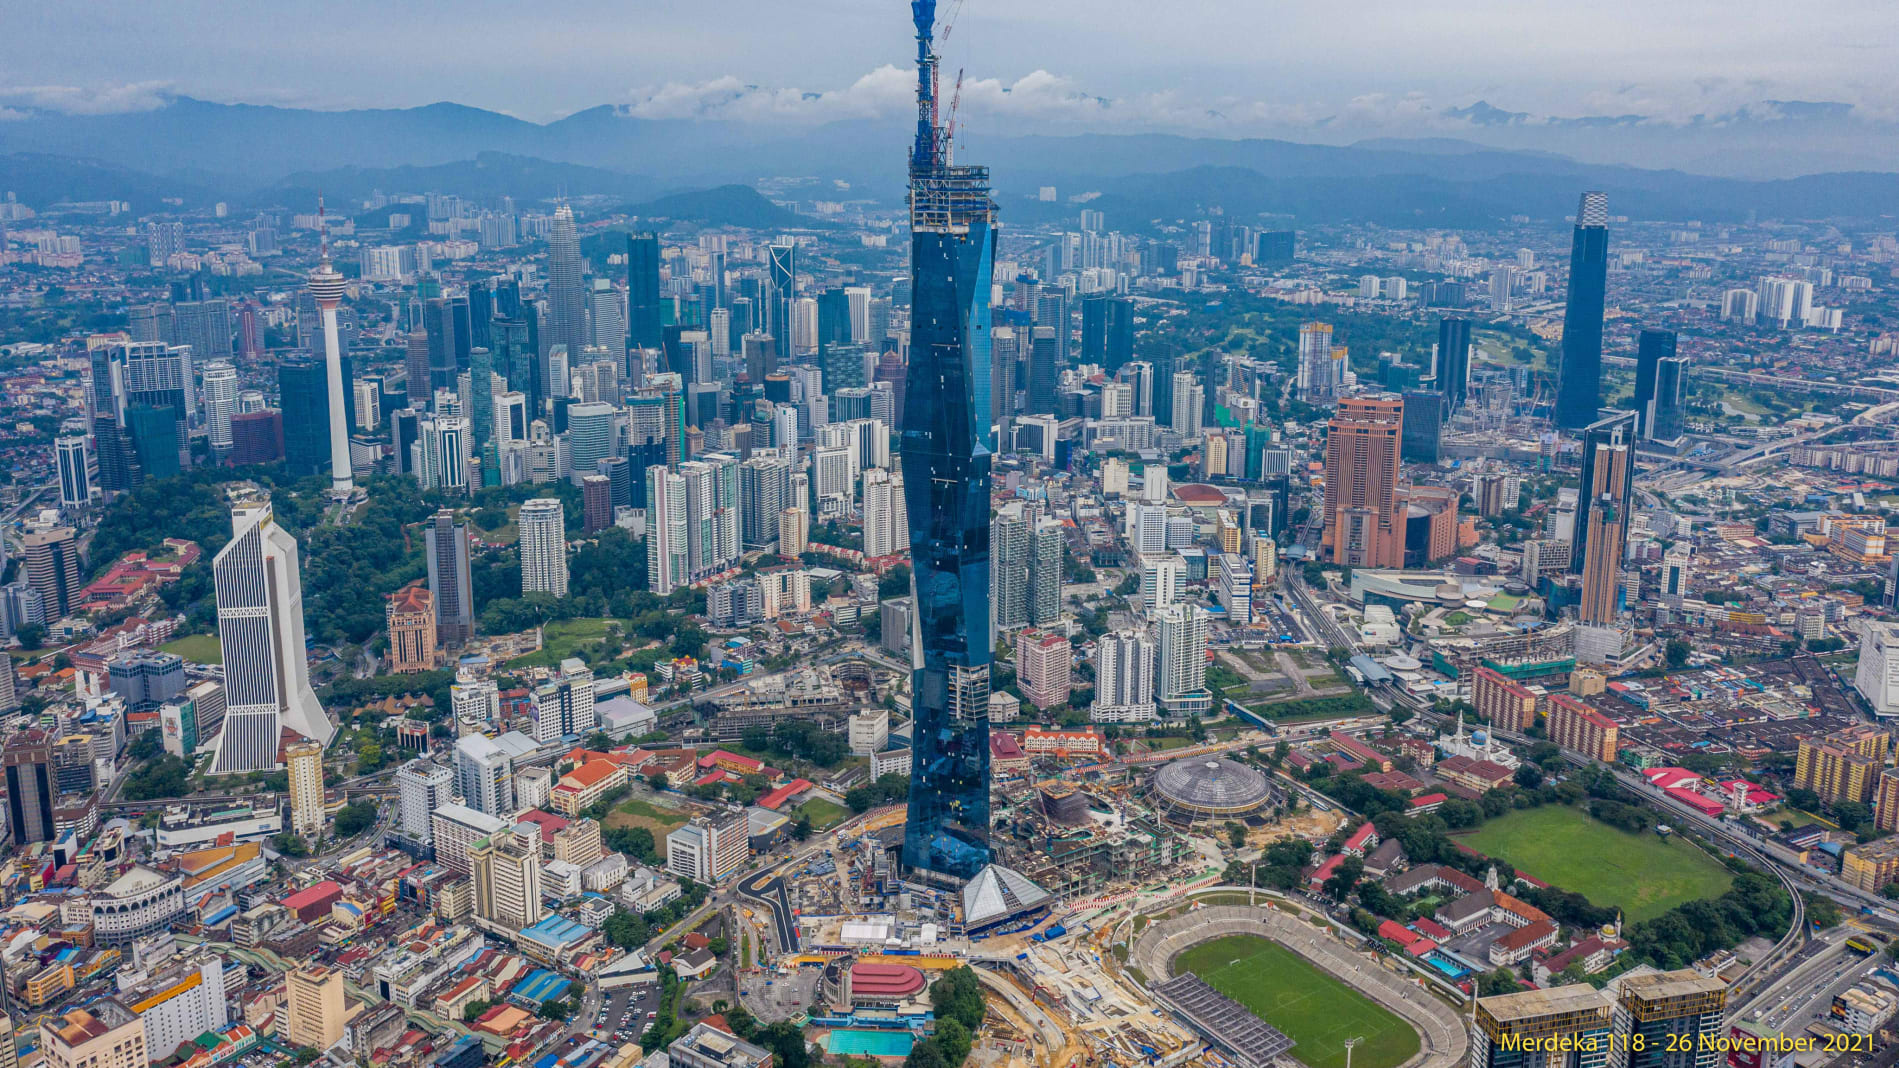 The Merdeka 118 building in Malaysia has reached the final stage of construction